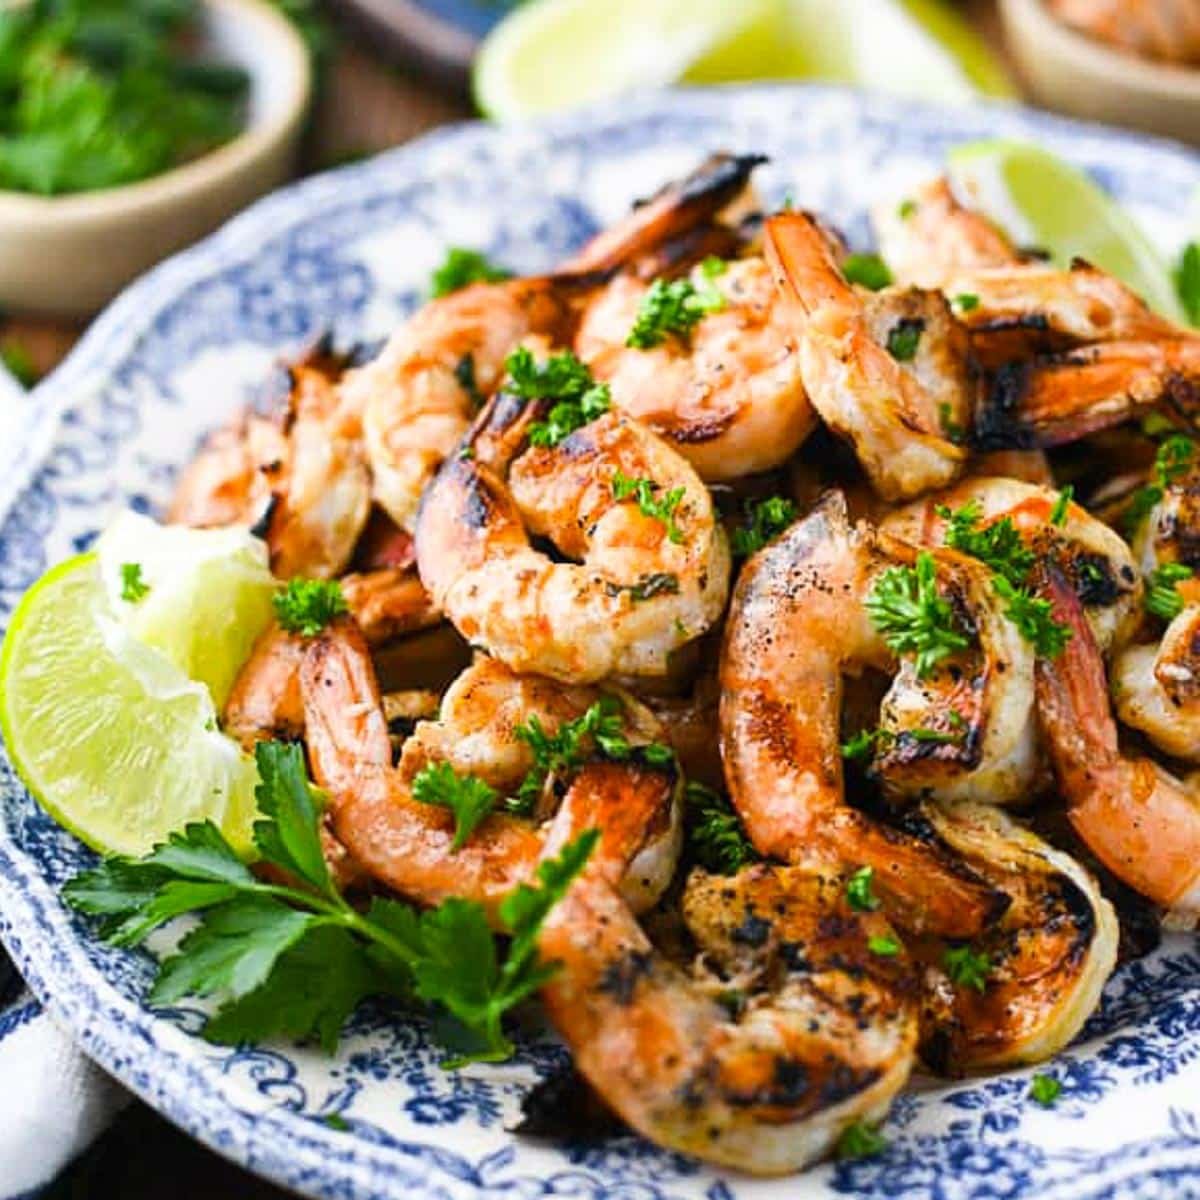 Grilling In: Try this Simple BBQ Shrimp recipe!